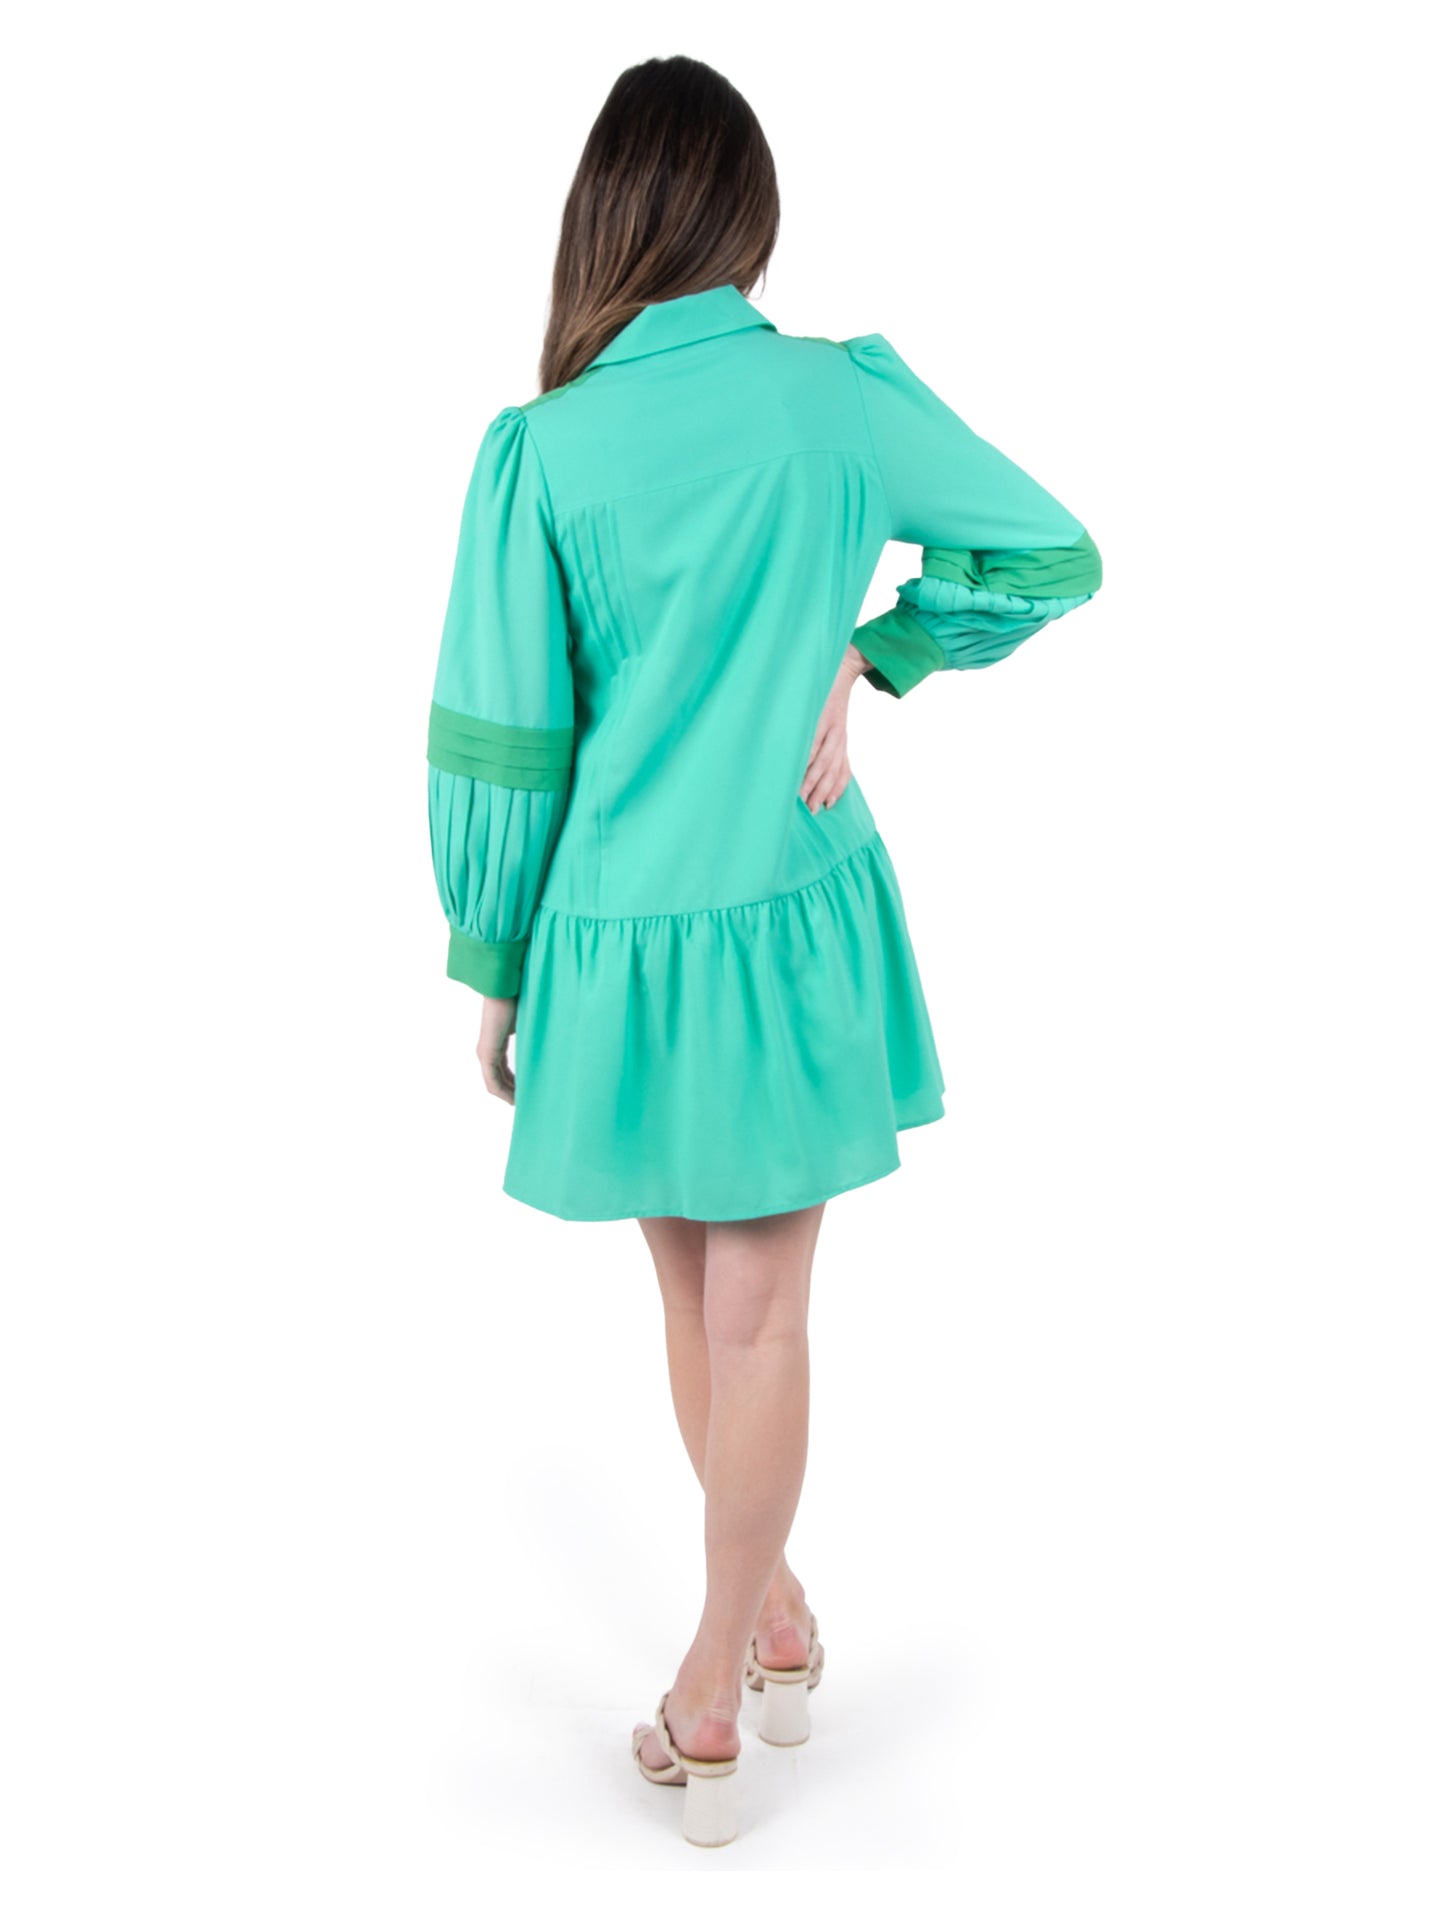 Emily McCarthy Delany Dress - Electric Green